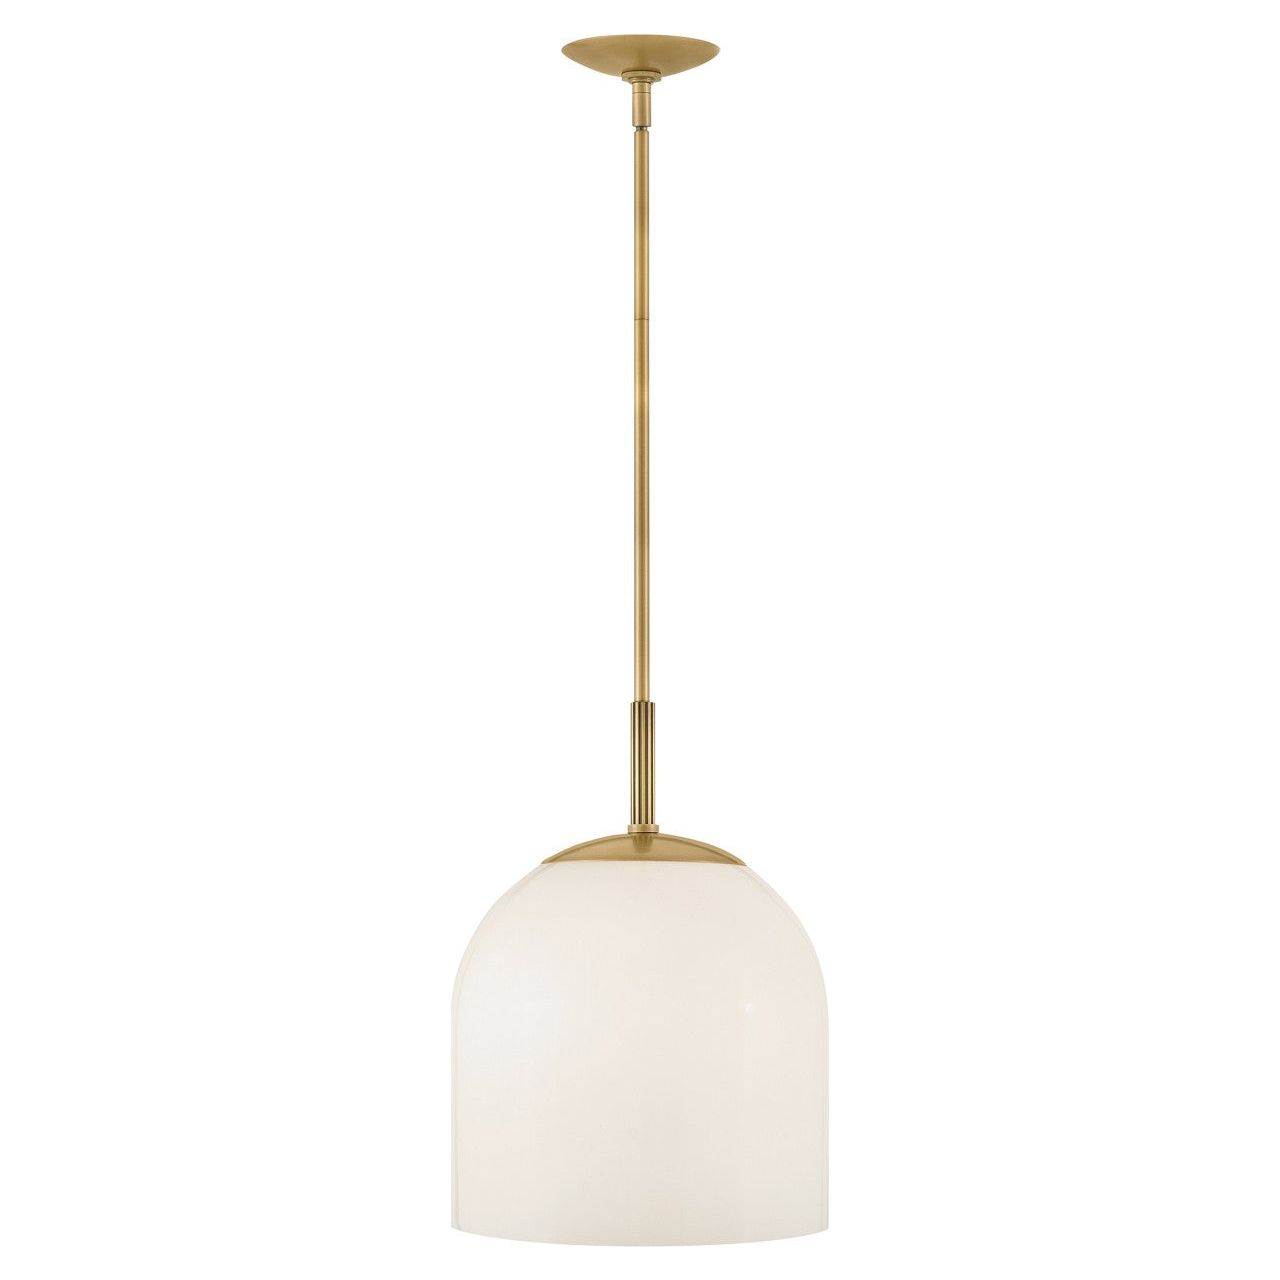 Hinkley Canada - 45097HB - LED Convertible Pendant - Willa - Heritage Brass